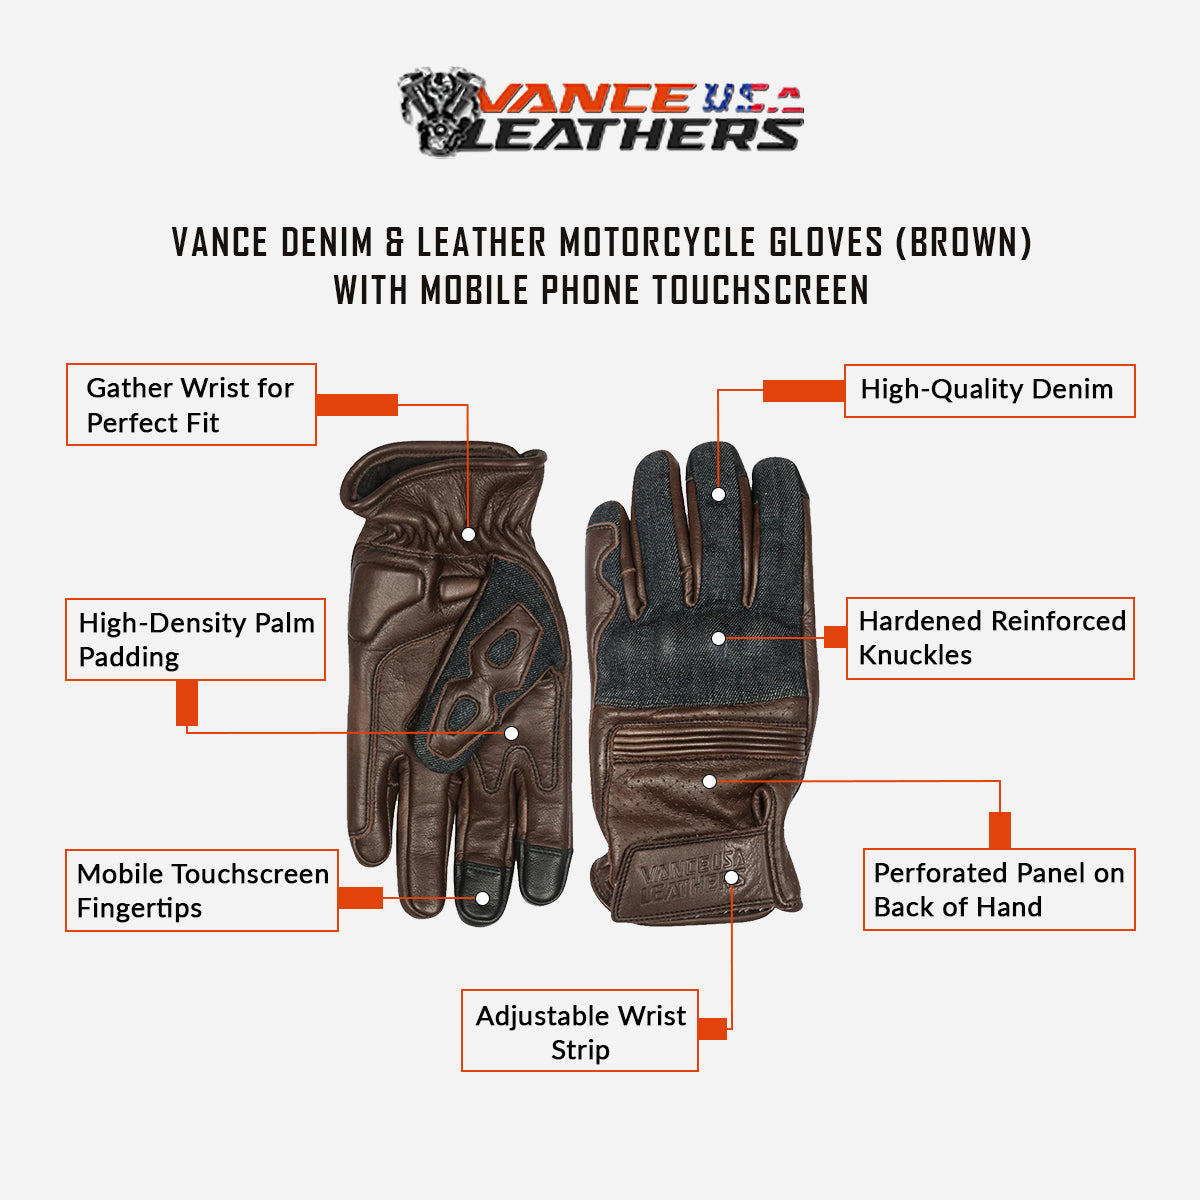 Vance VL480Br Denim and Leather Motorcycle Gloves - Info